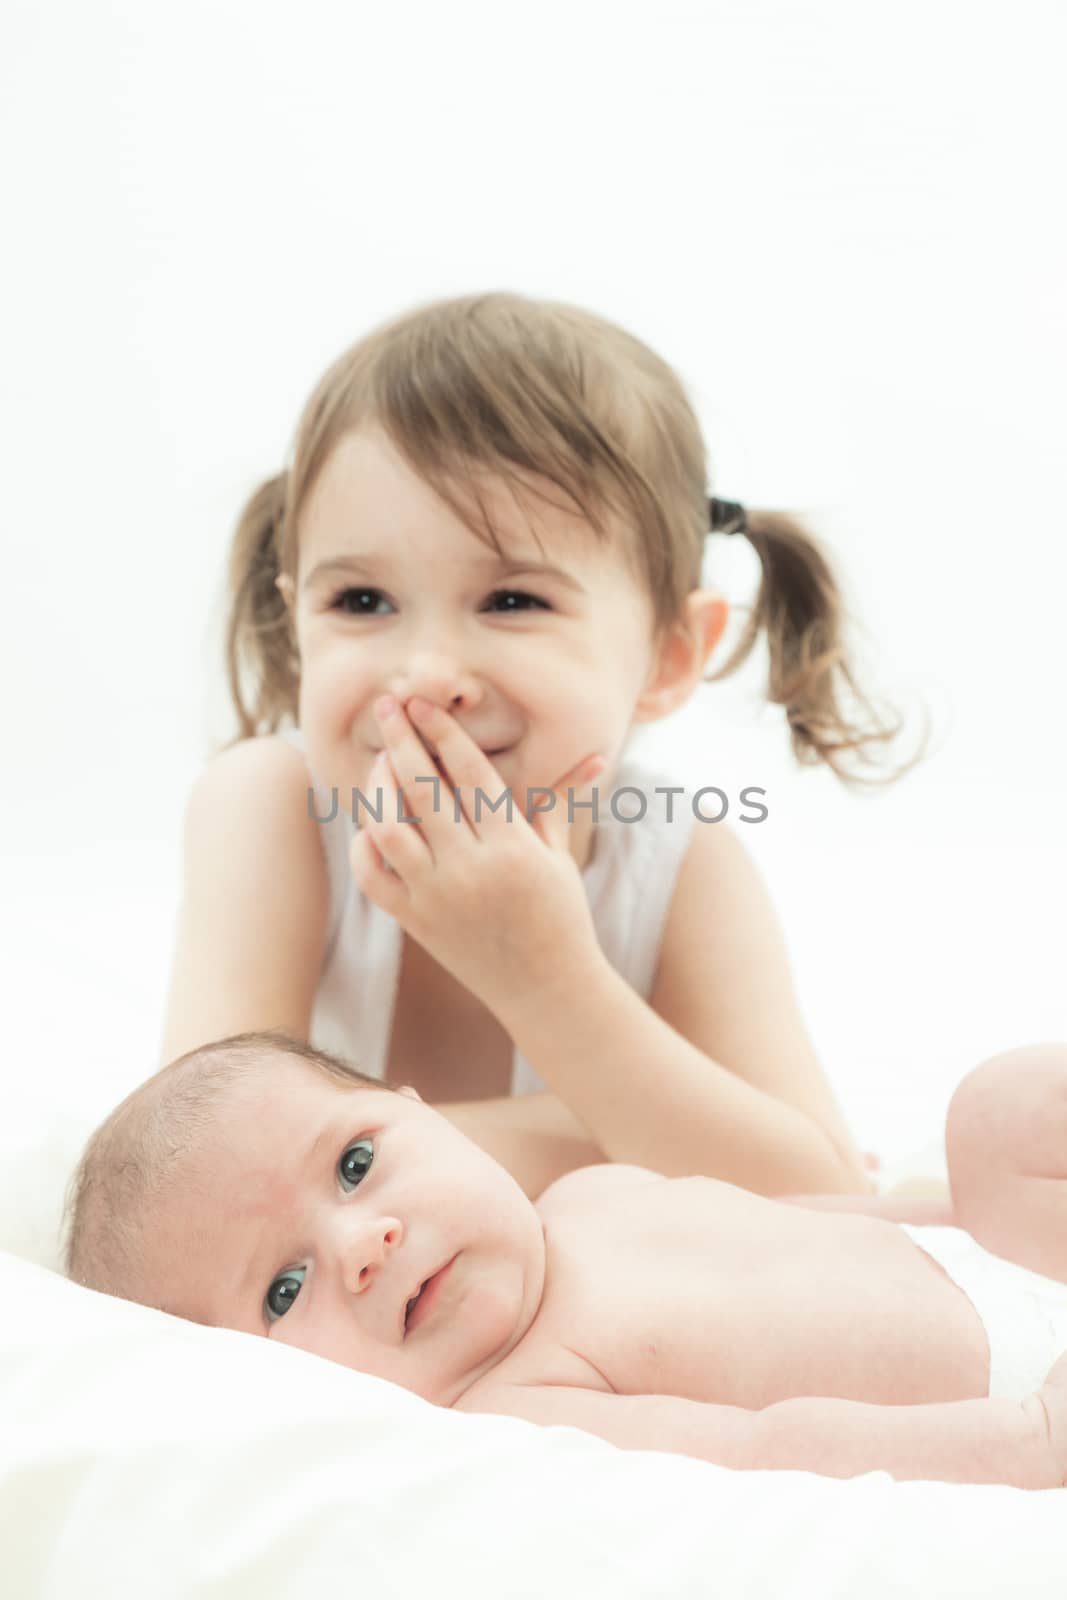 elder sister and the younger newborn child on a white background